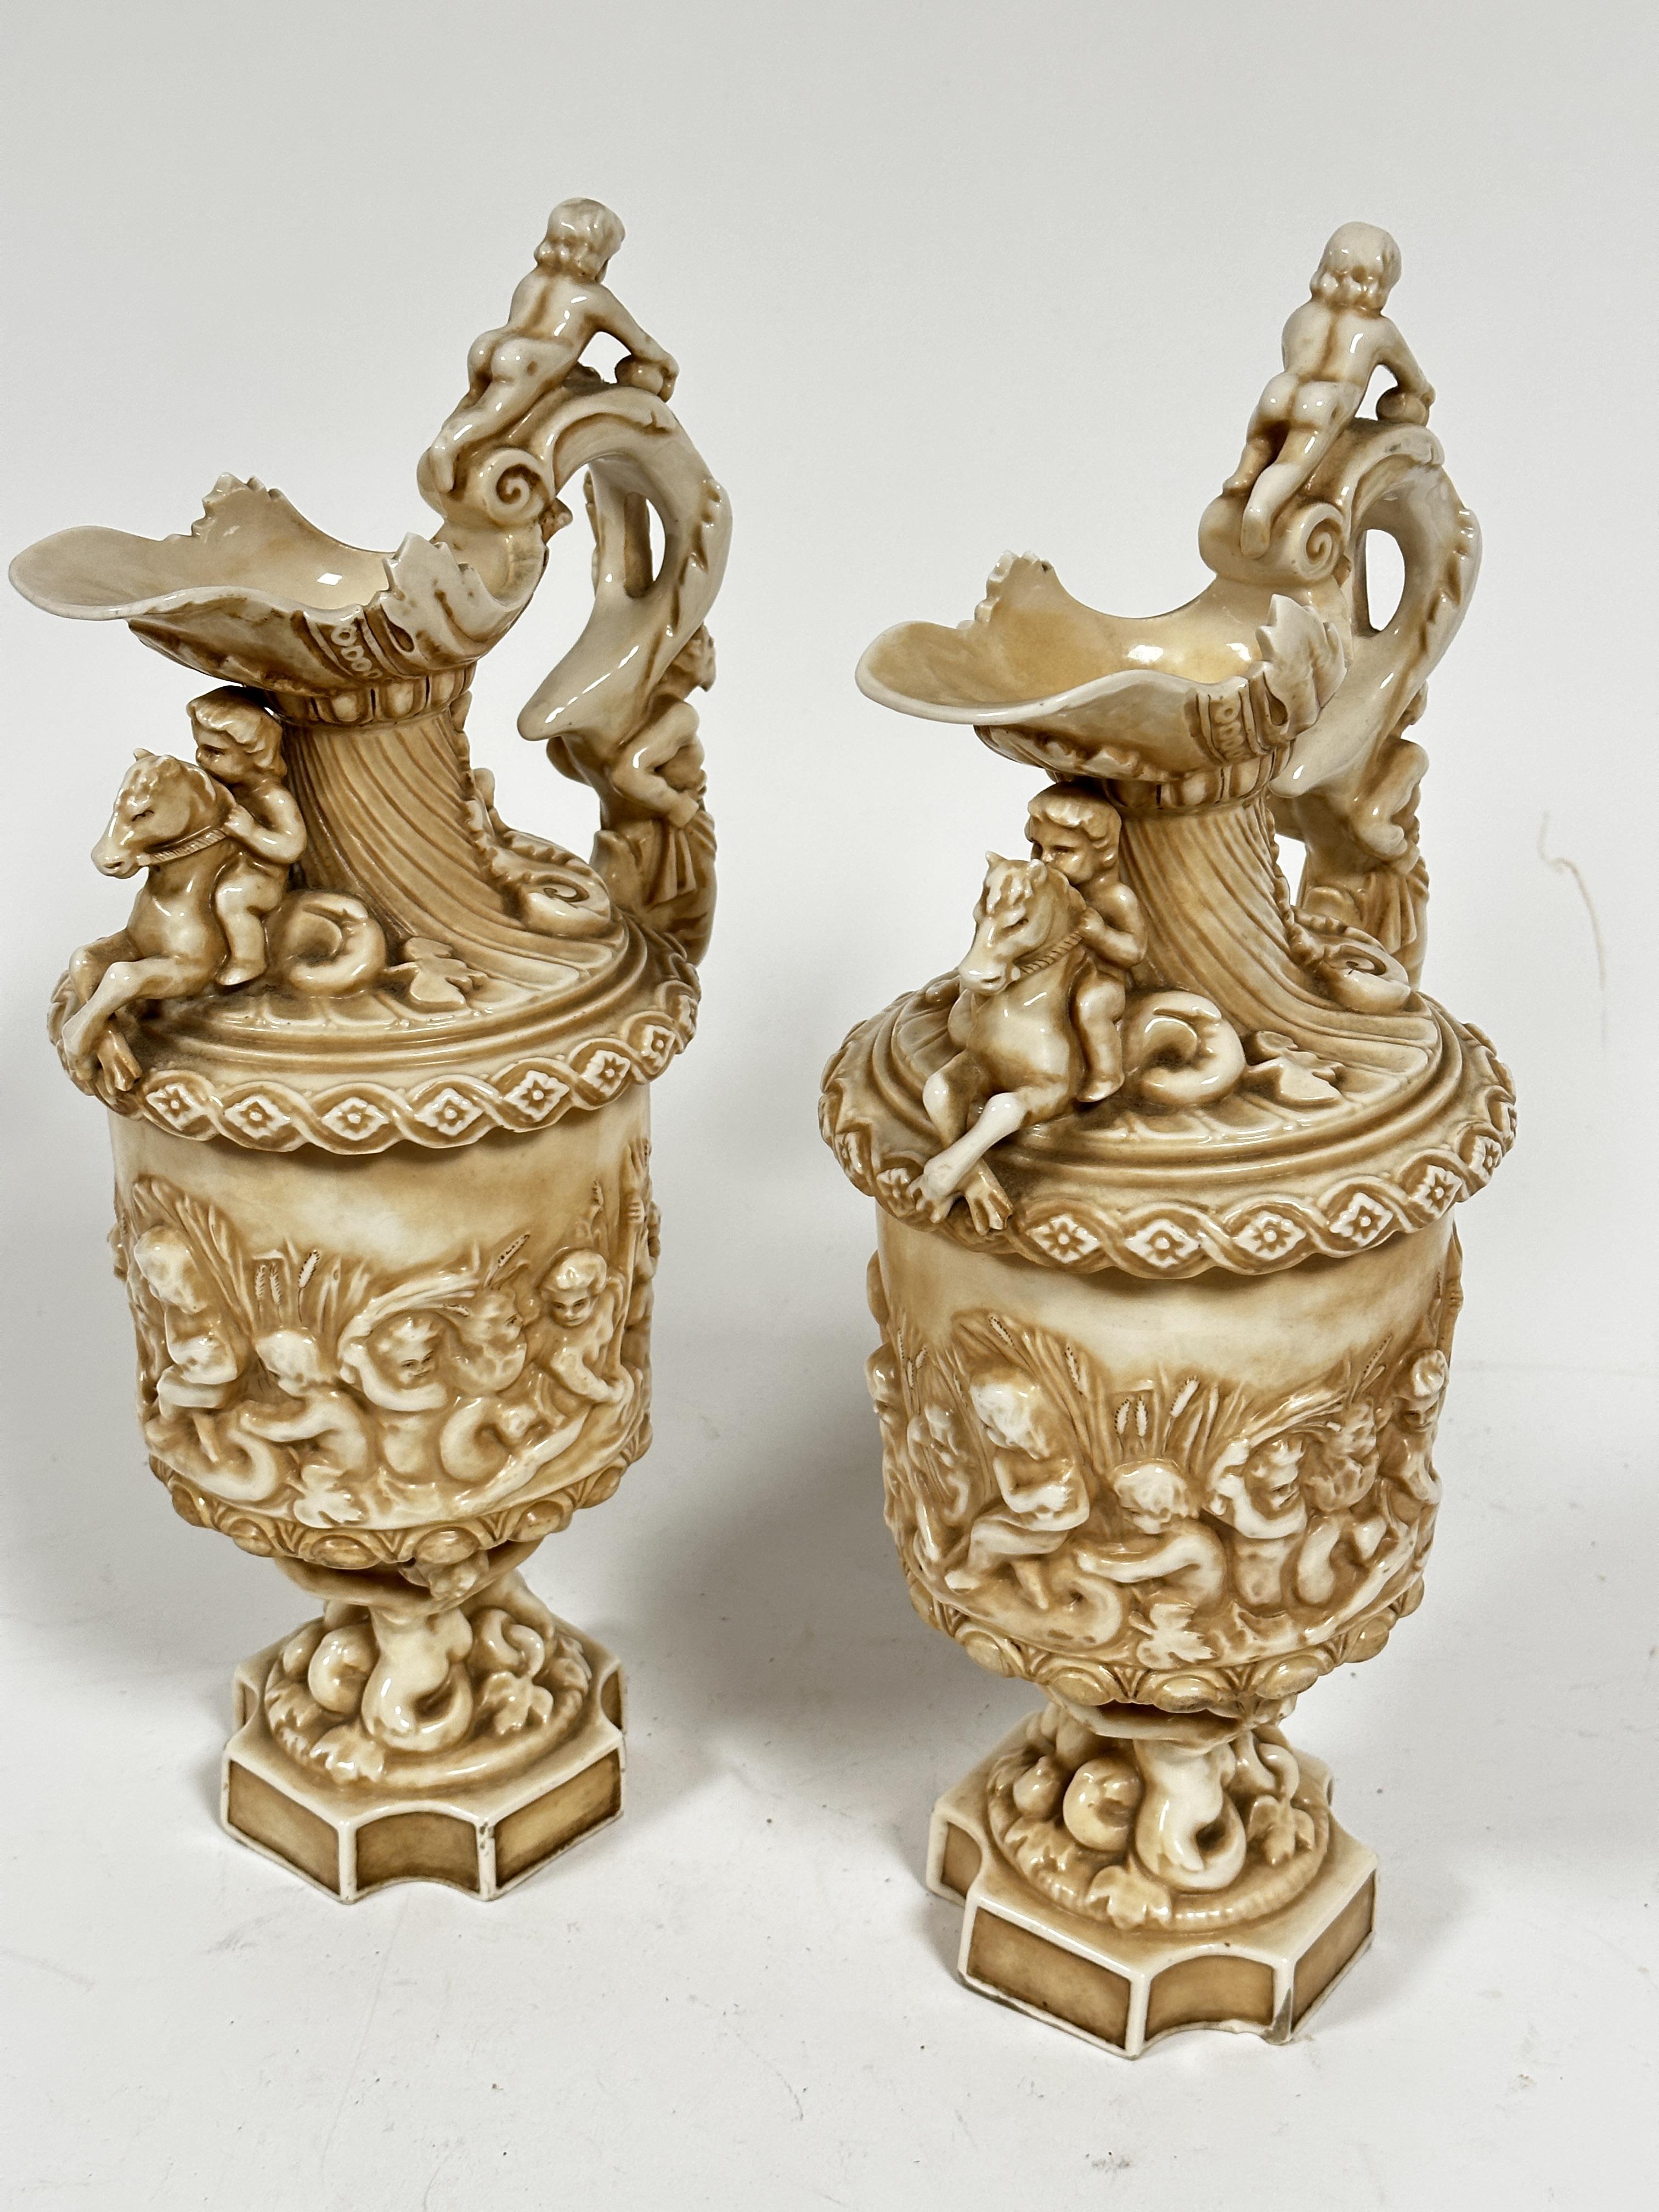 A pair of late 19thc Rudolstadt Straus & Sohne ewers, the handles mounted with cherubs with mask - Image 4 of 12